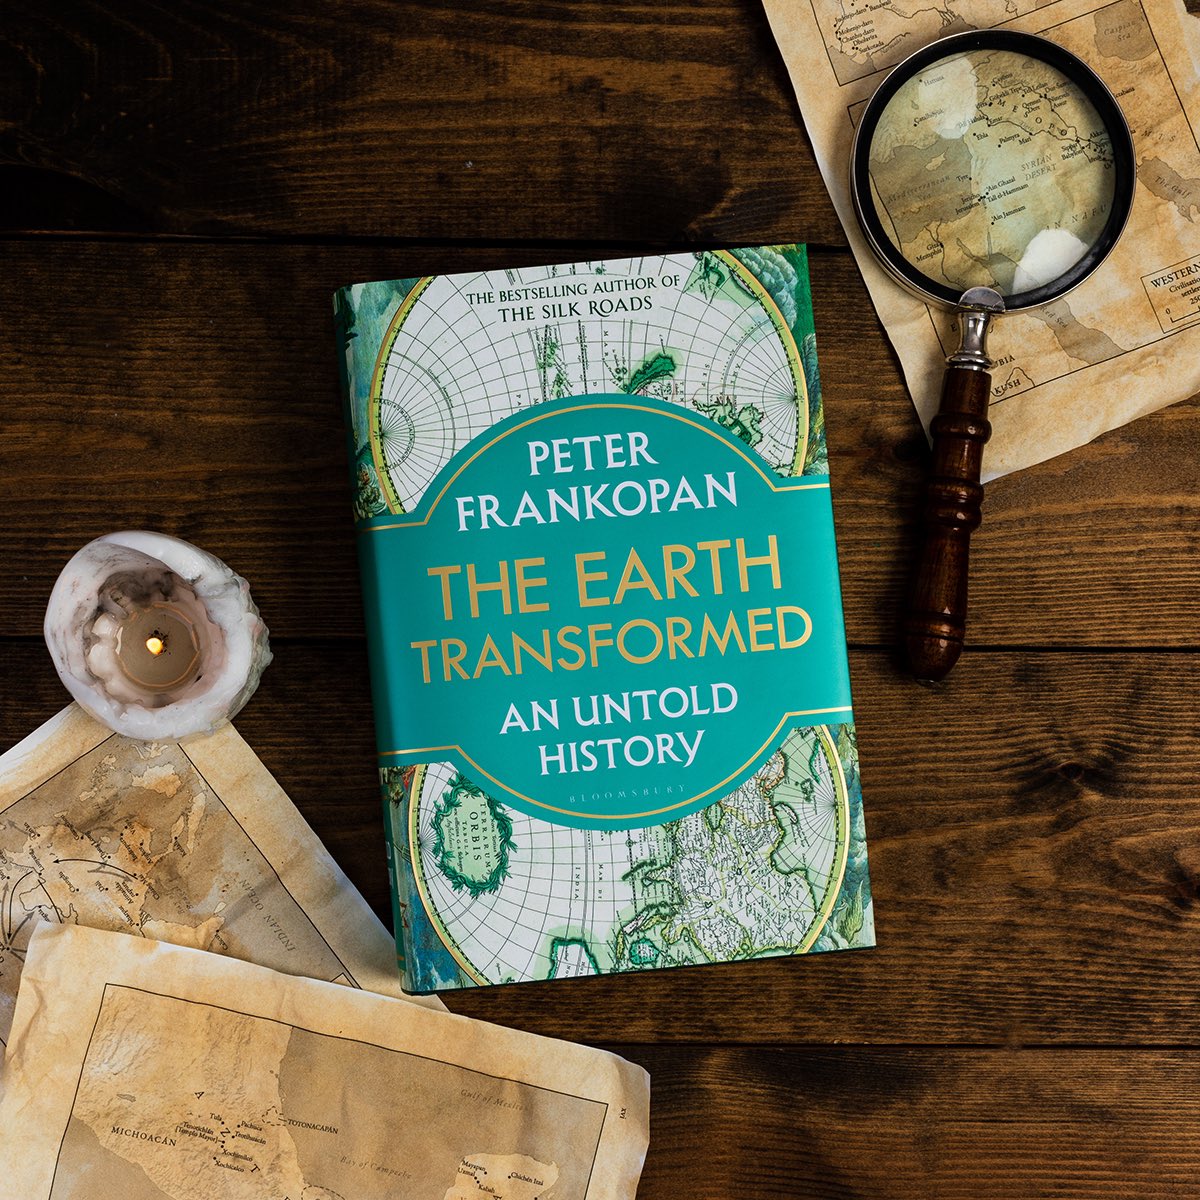 We’re looking forward to our event with @peterfrankopan! Make sure you book your tickets now : eventbrite.co.uk/e/the-earth-tr… @BloomsburyBooks #earthtransformed #theearthtransformed #peterfrankopan